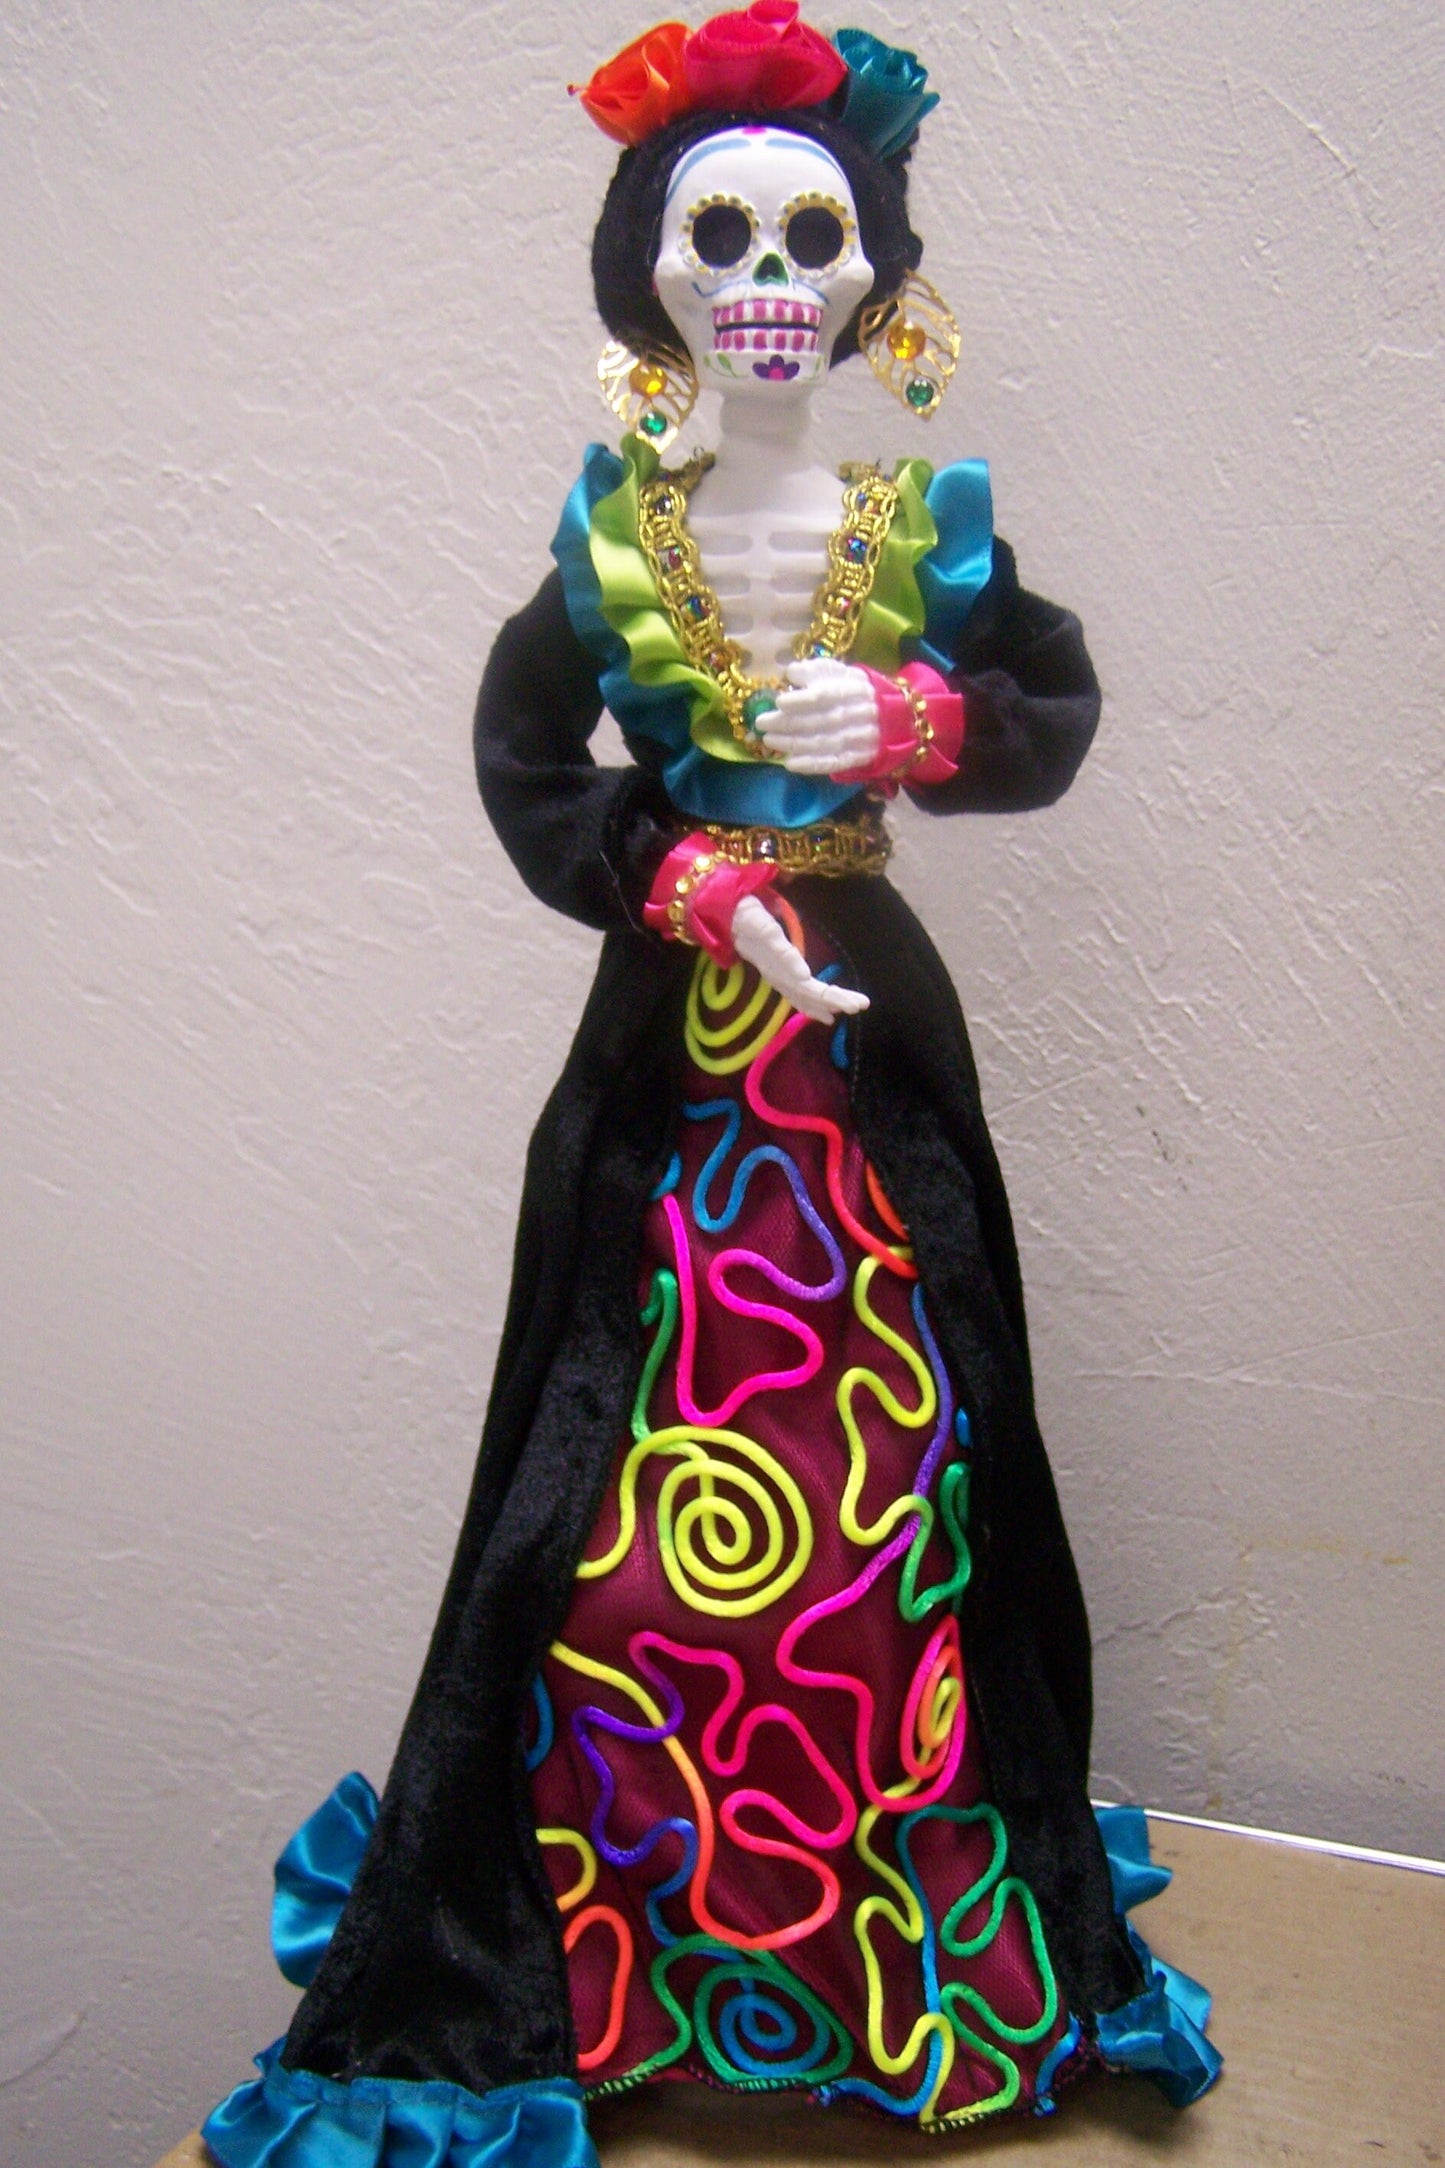 17" Tall Catrina Elaborately Clothed Plastic Sculpture #1 - Day of the Dead, Happy Skeleton